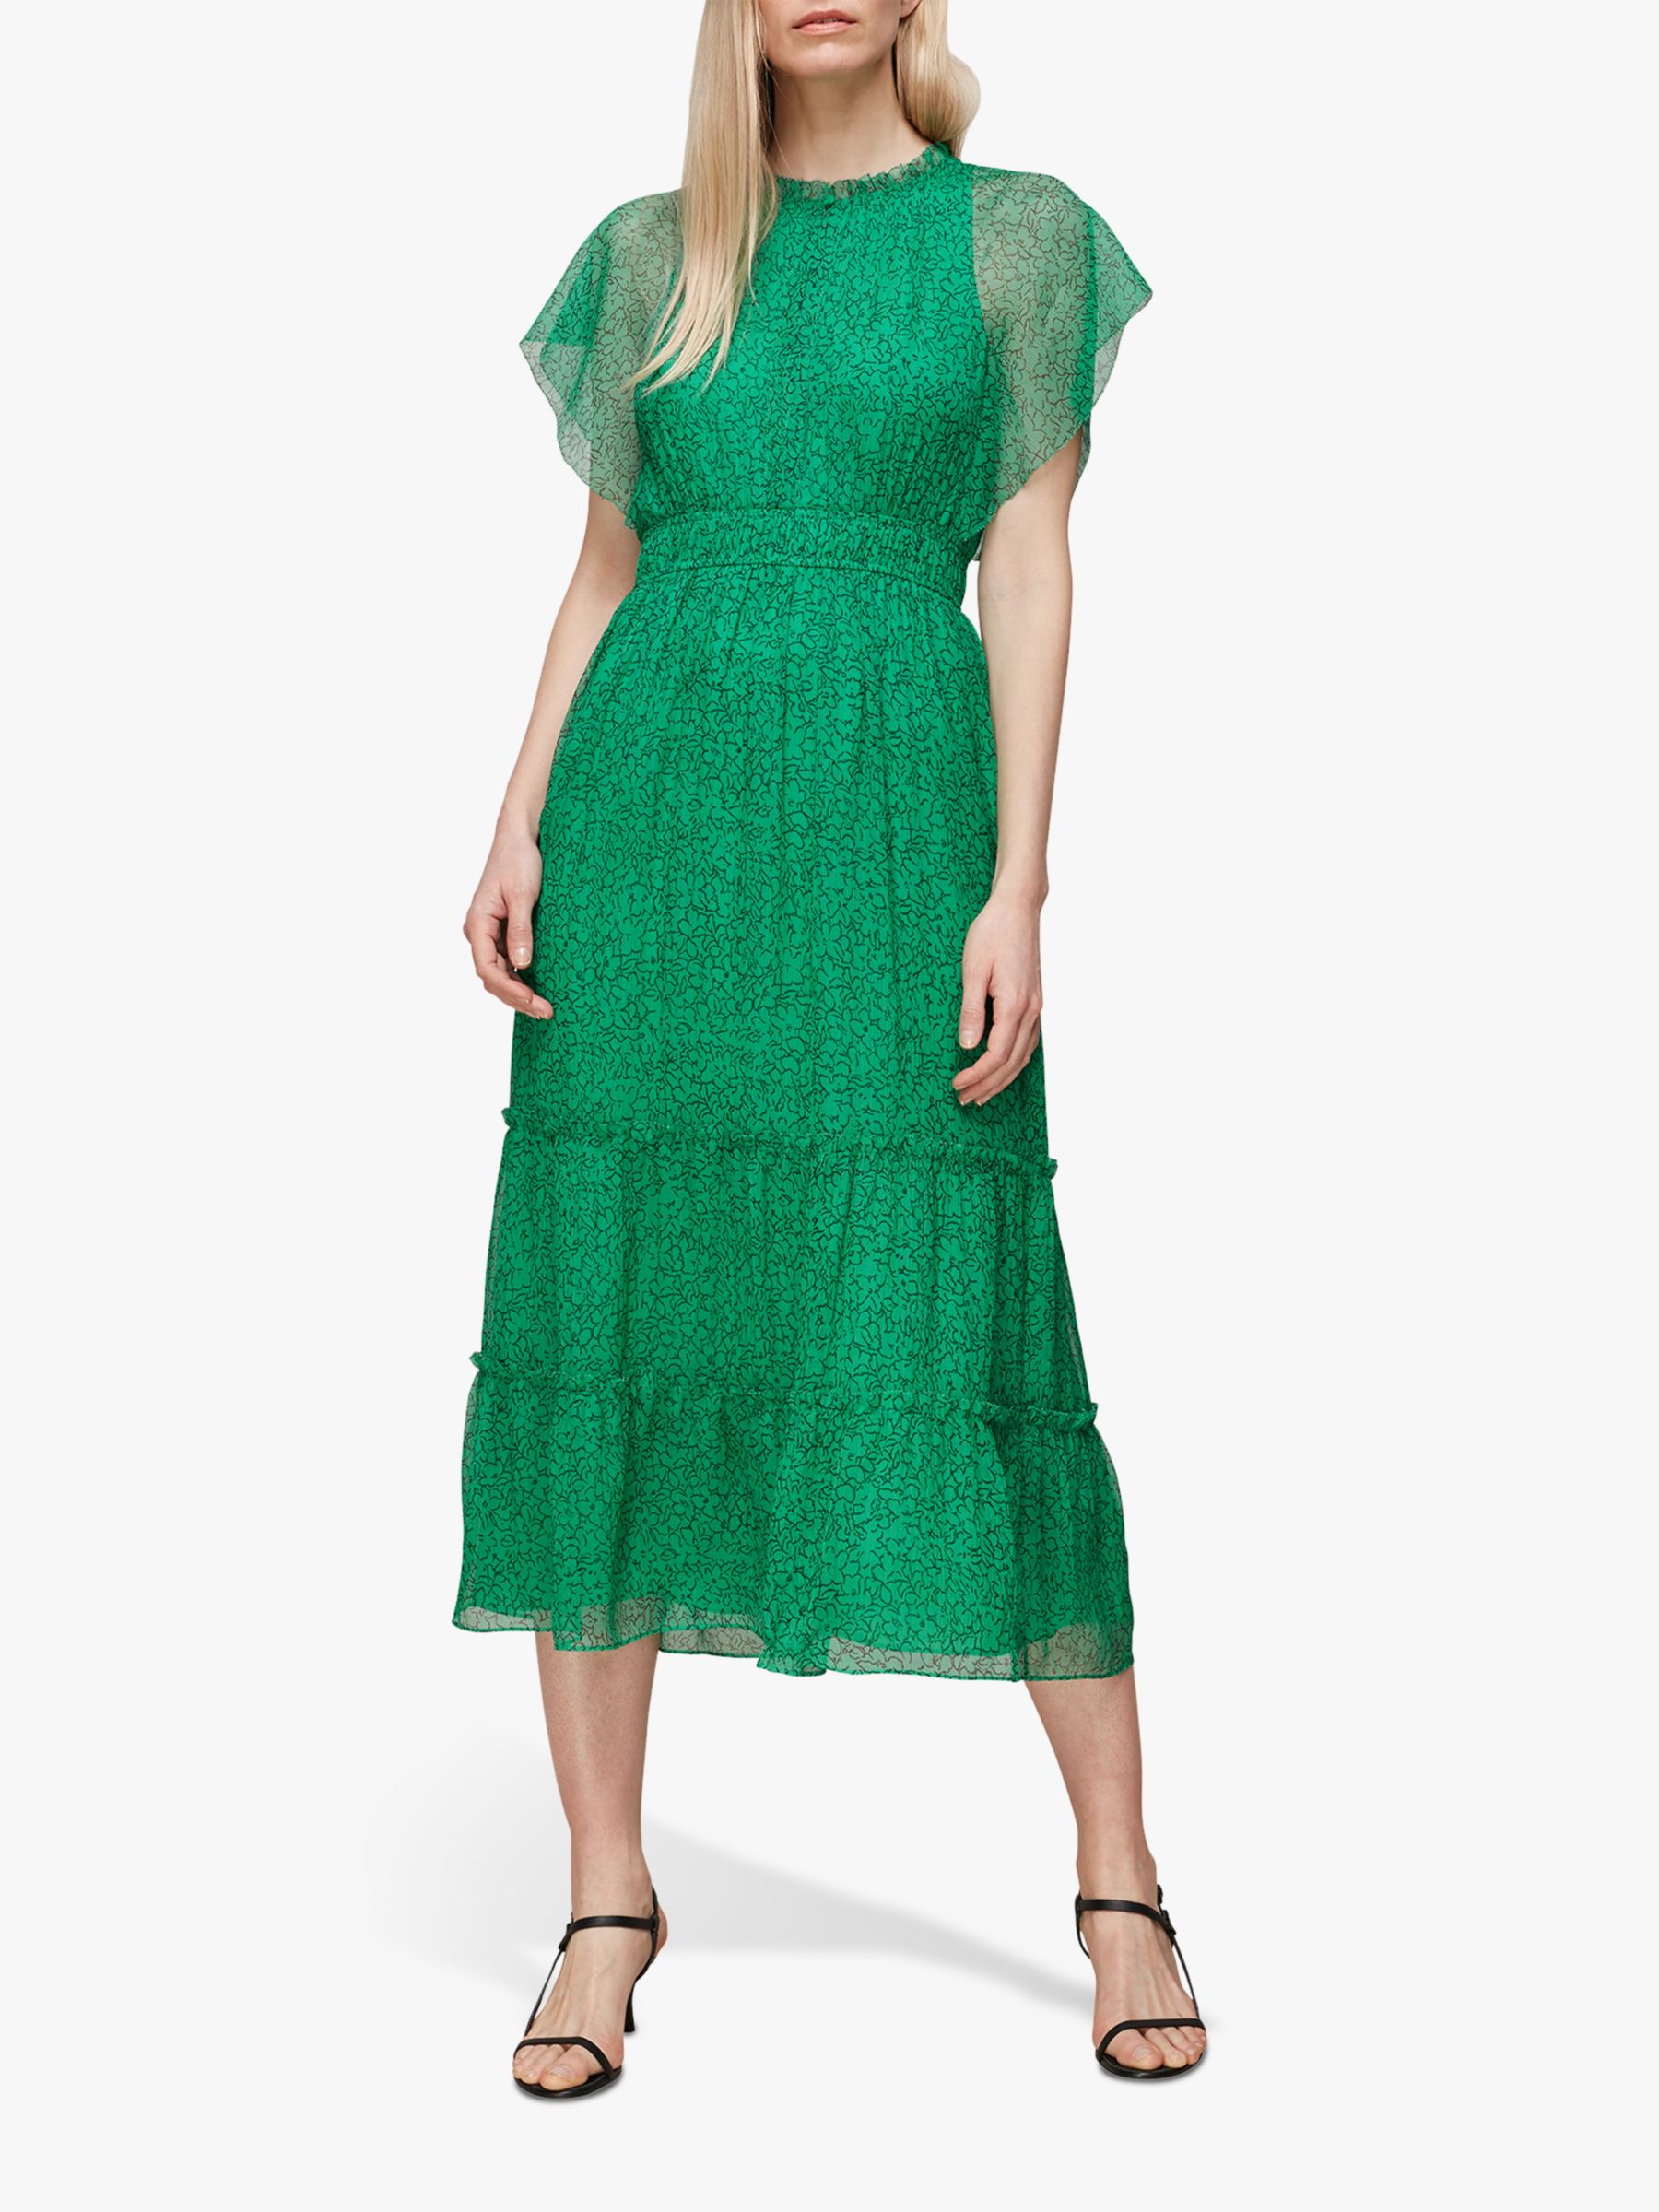 Whistles Sketched Floral Frill Midi Dress, Green/Multi at John Lewis ...